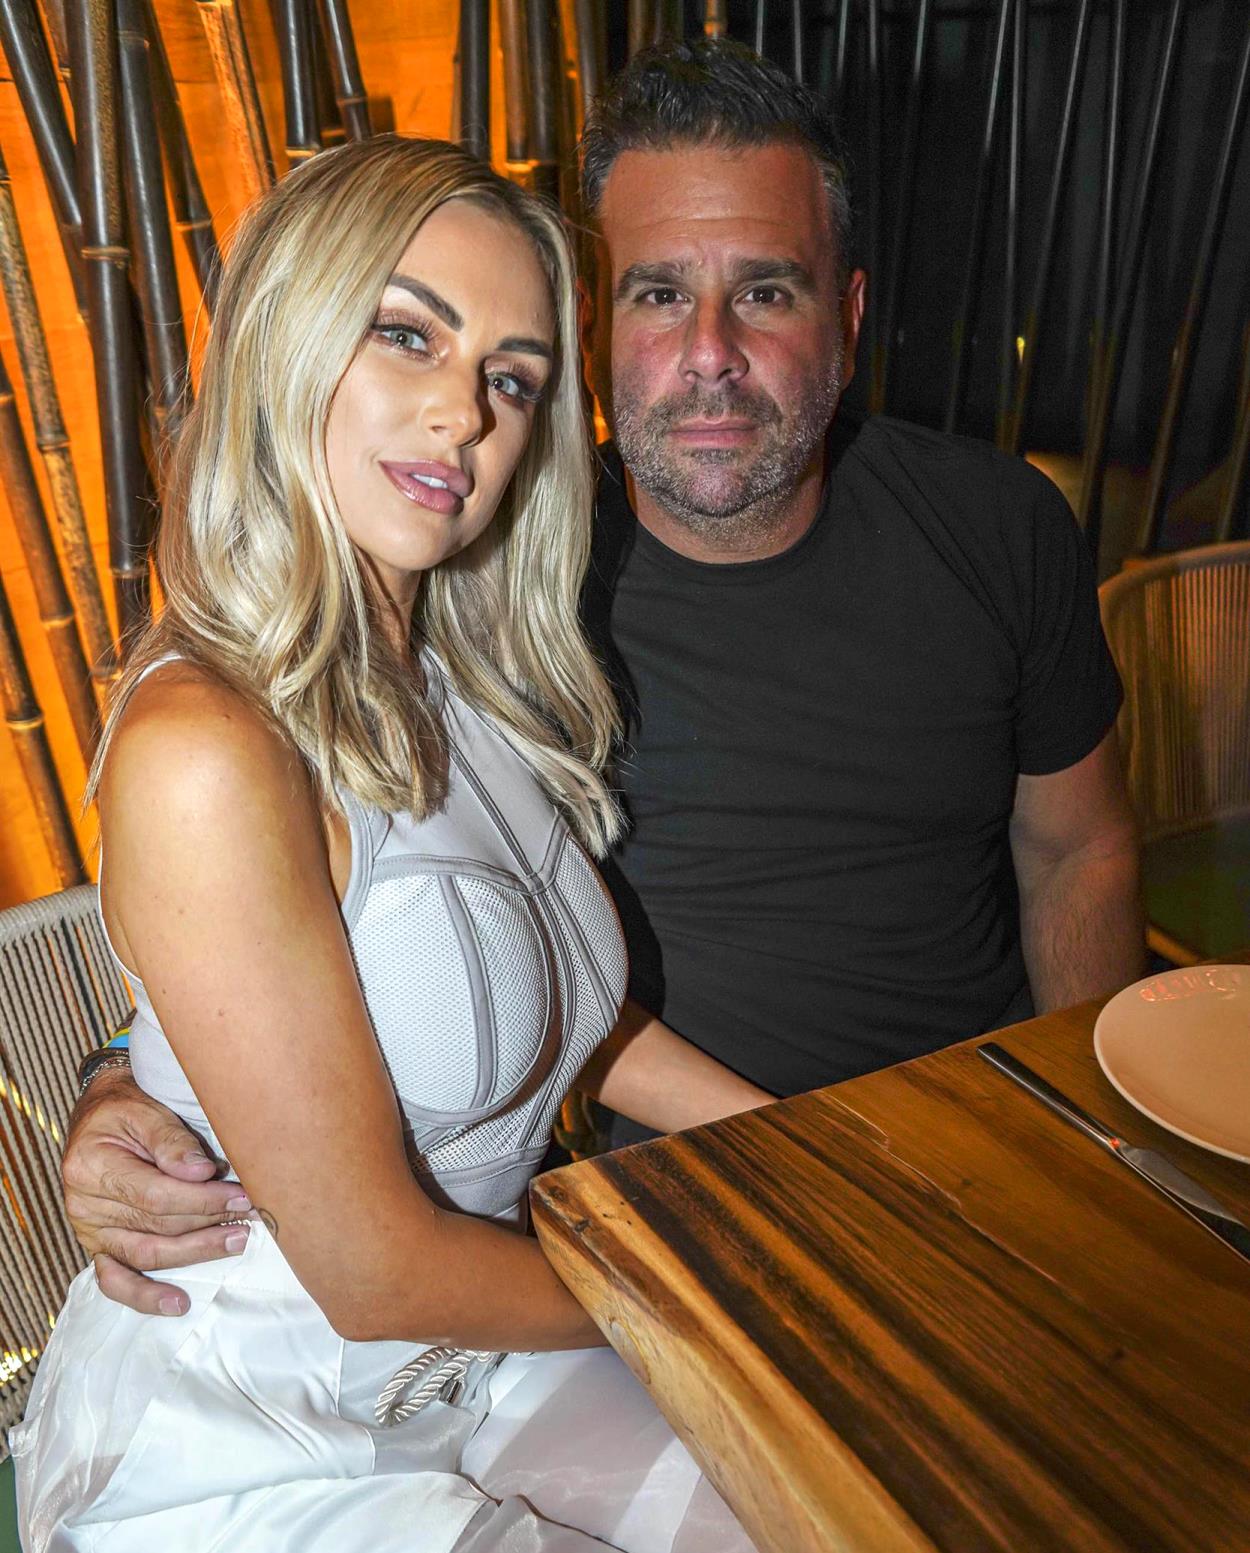 Lala Kent accuses Randall Emmett of ‘tackling’ her to the ground